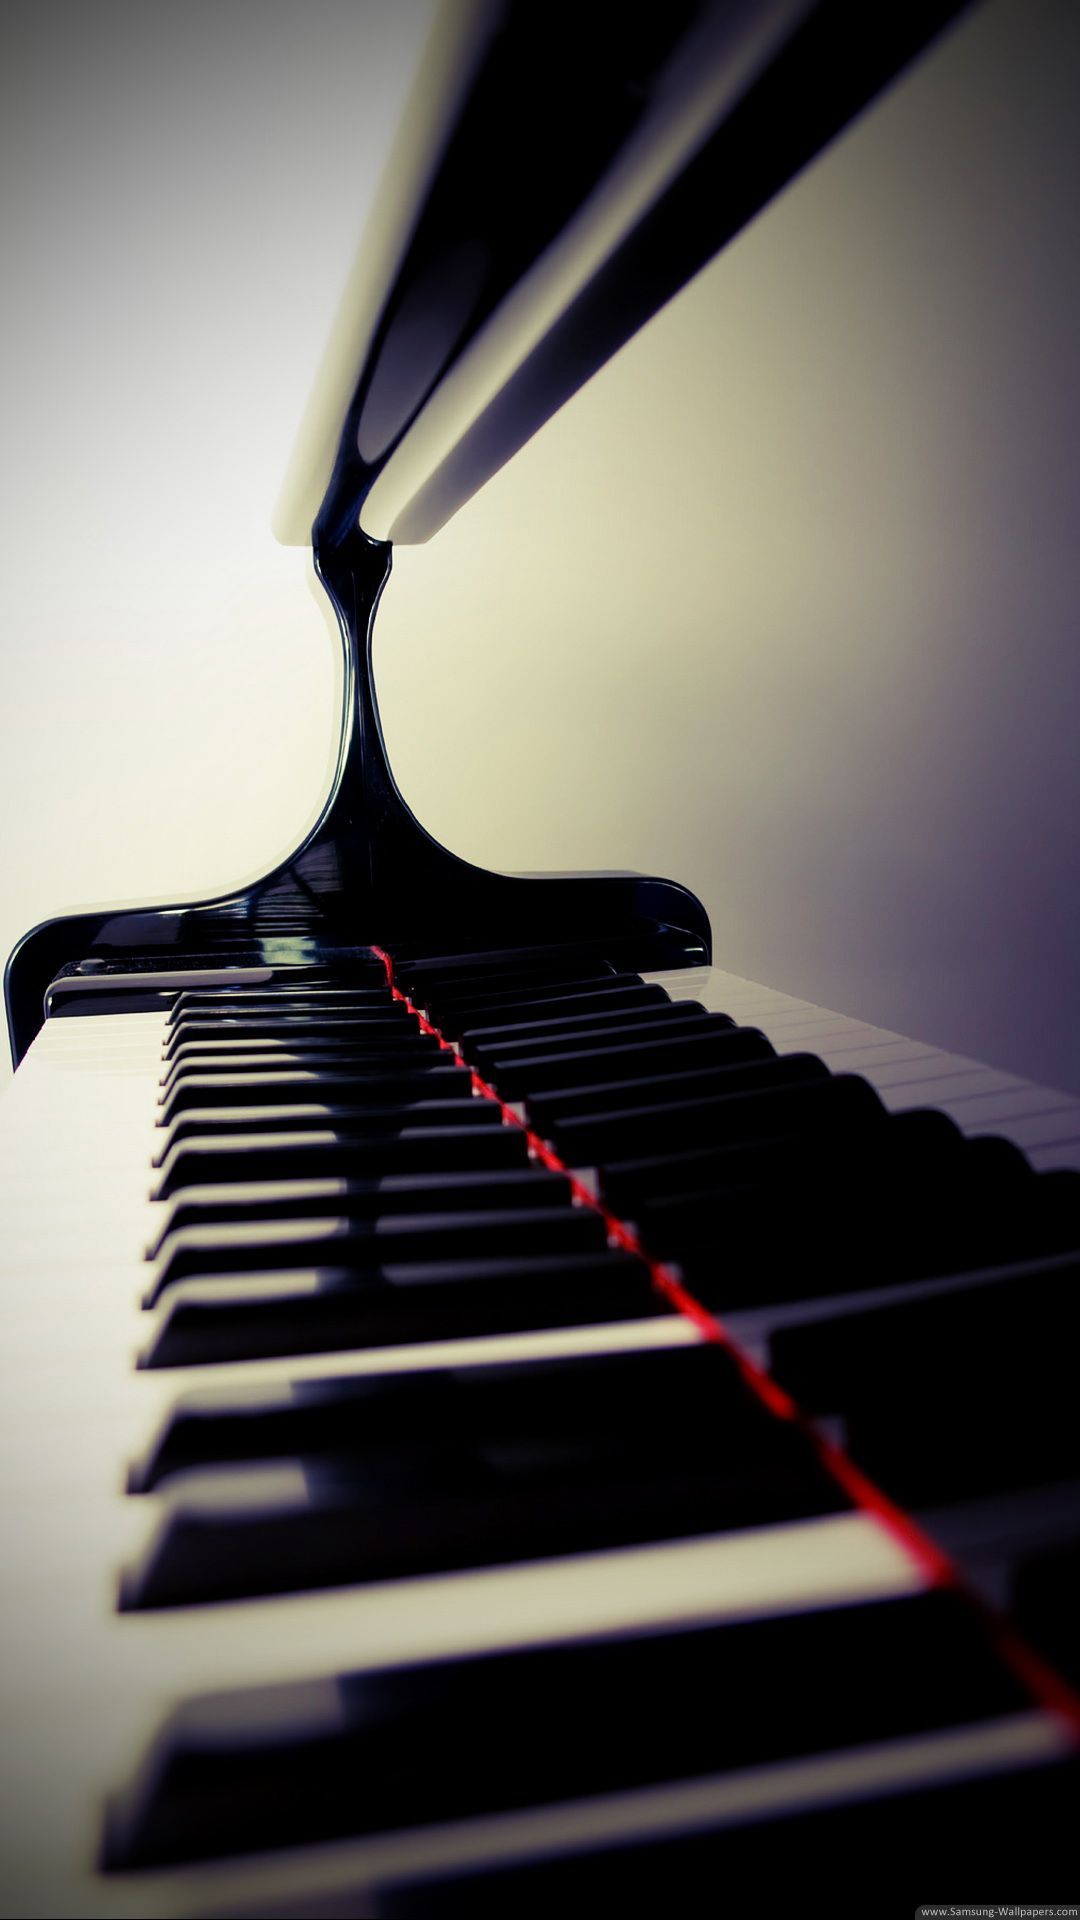 Music iPhone Wallpaper For Music Manias. Music wallpaper, Piano, Piano photography